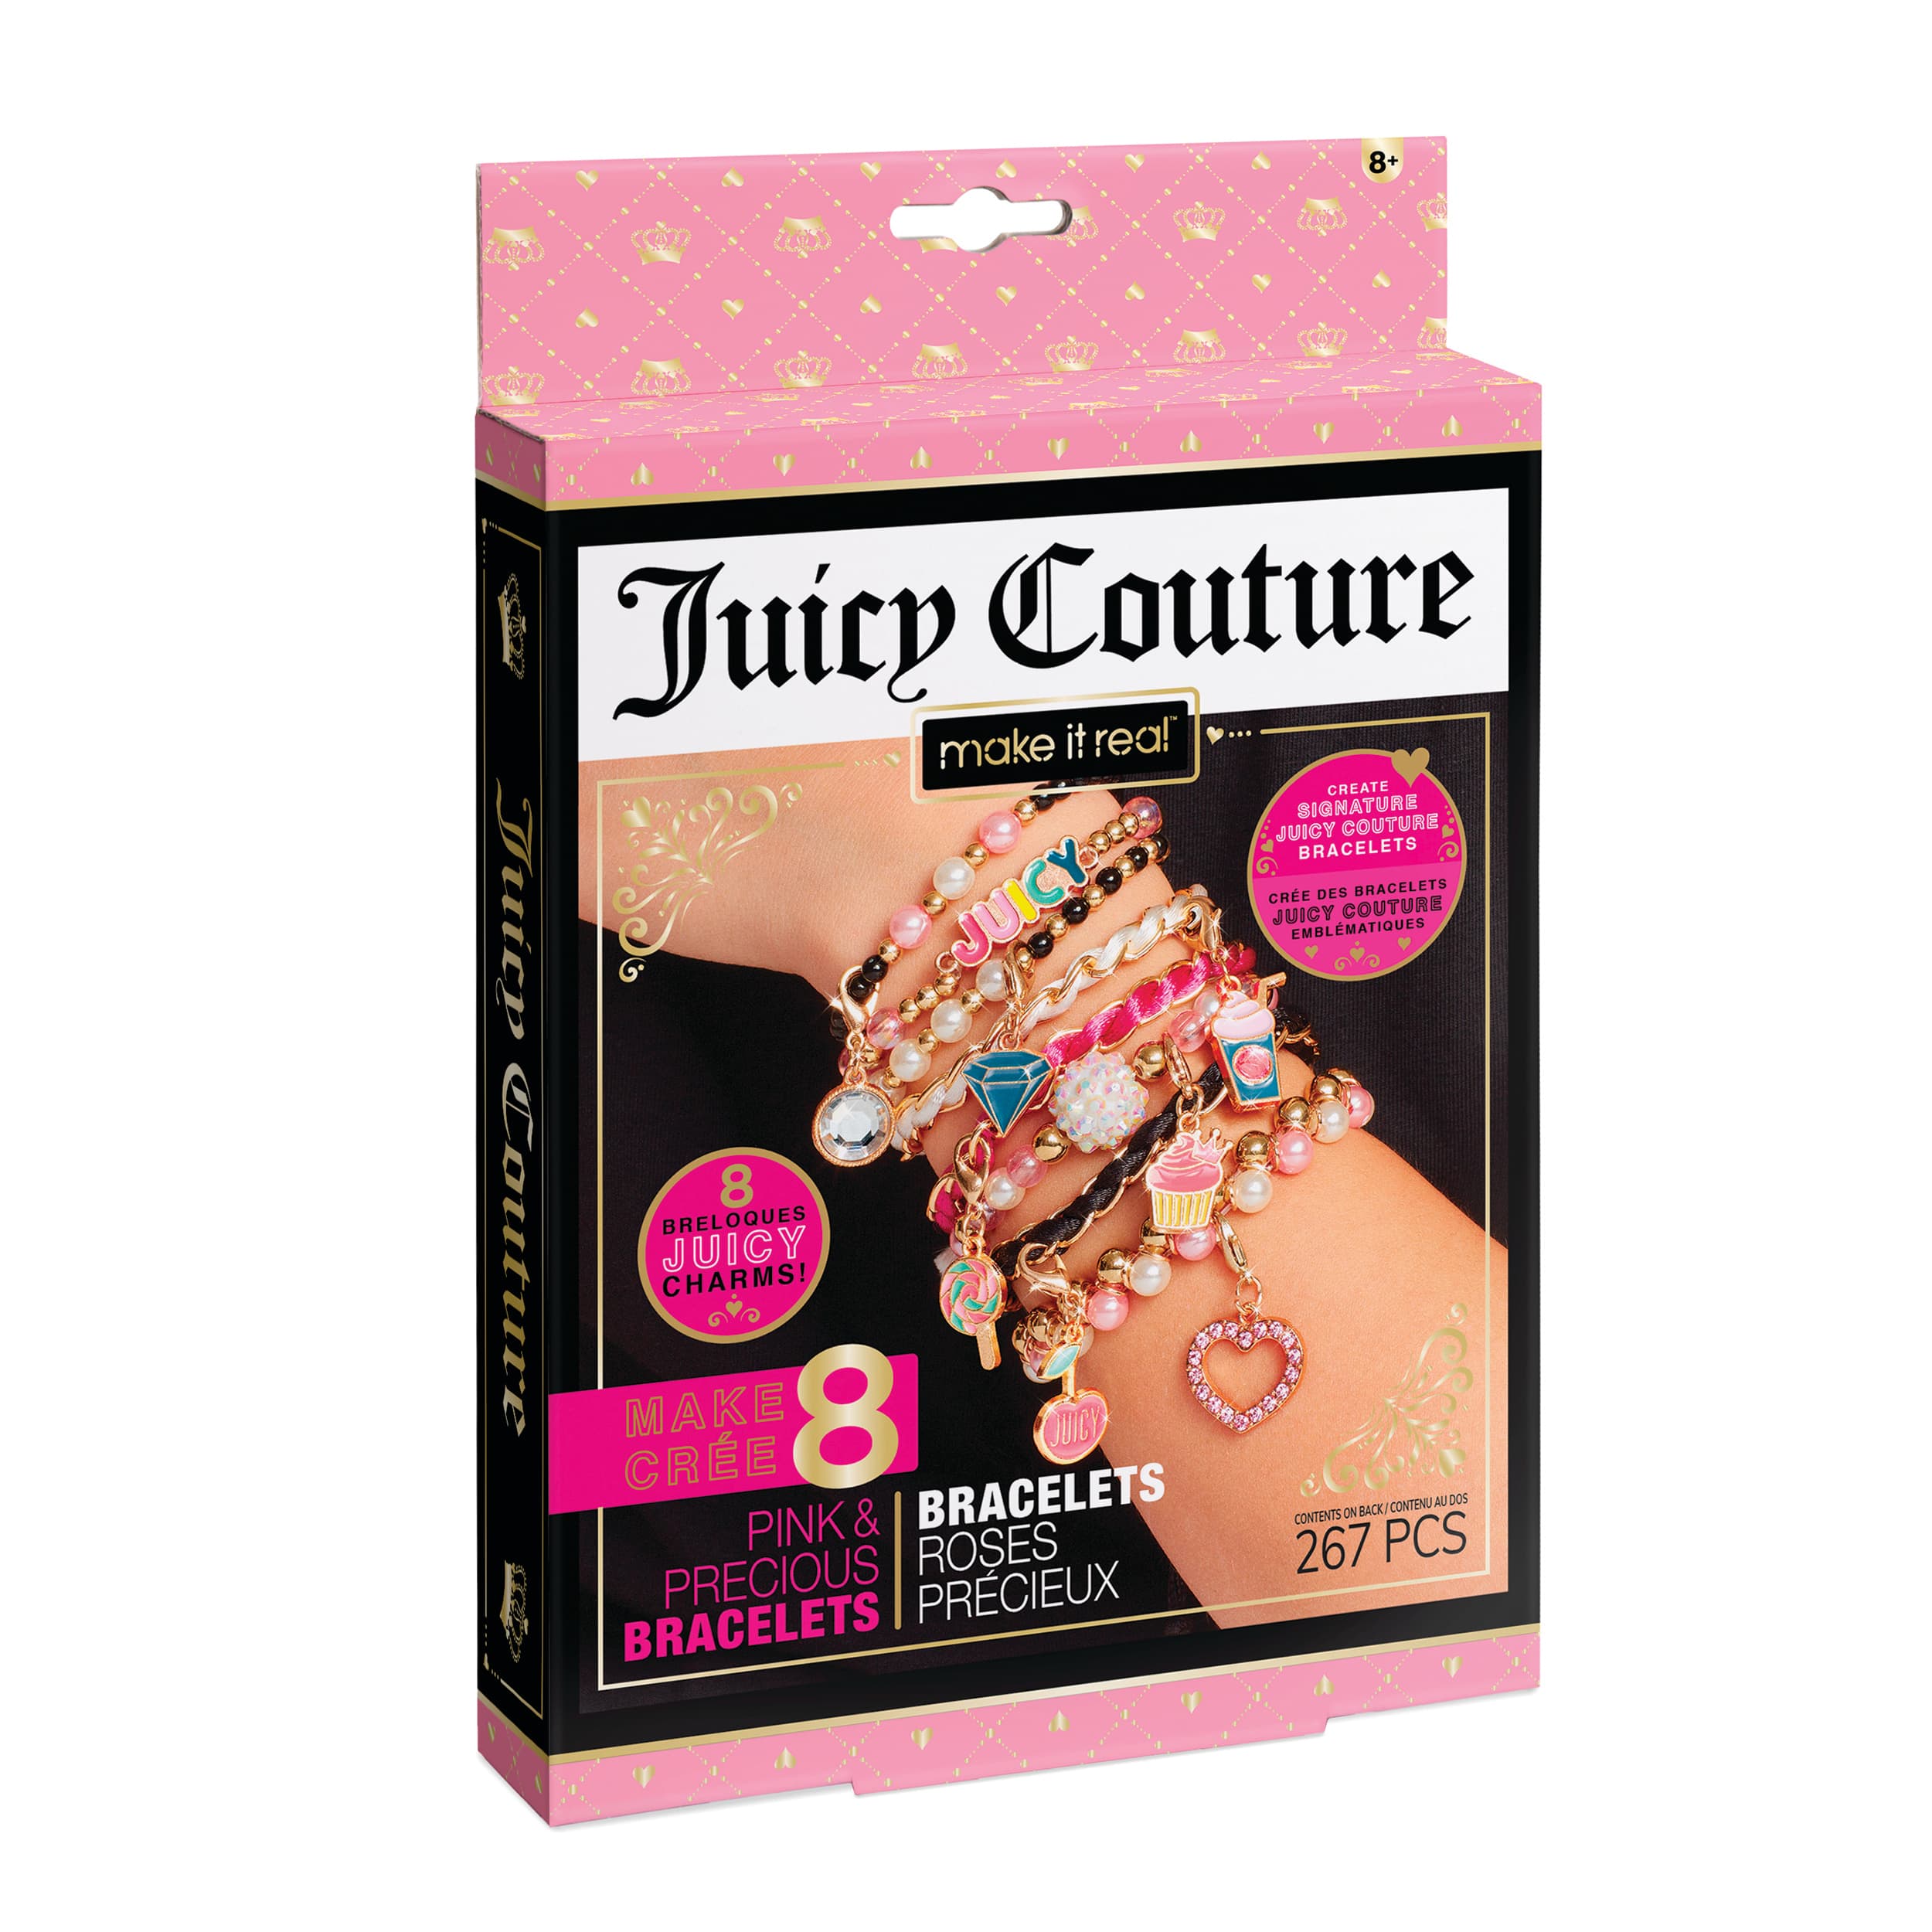 Juicy Couture Make it Real™ Perfectly Pink Bracelet Kit, Michaels